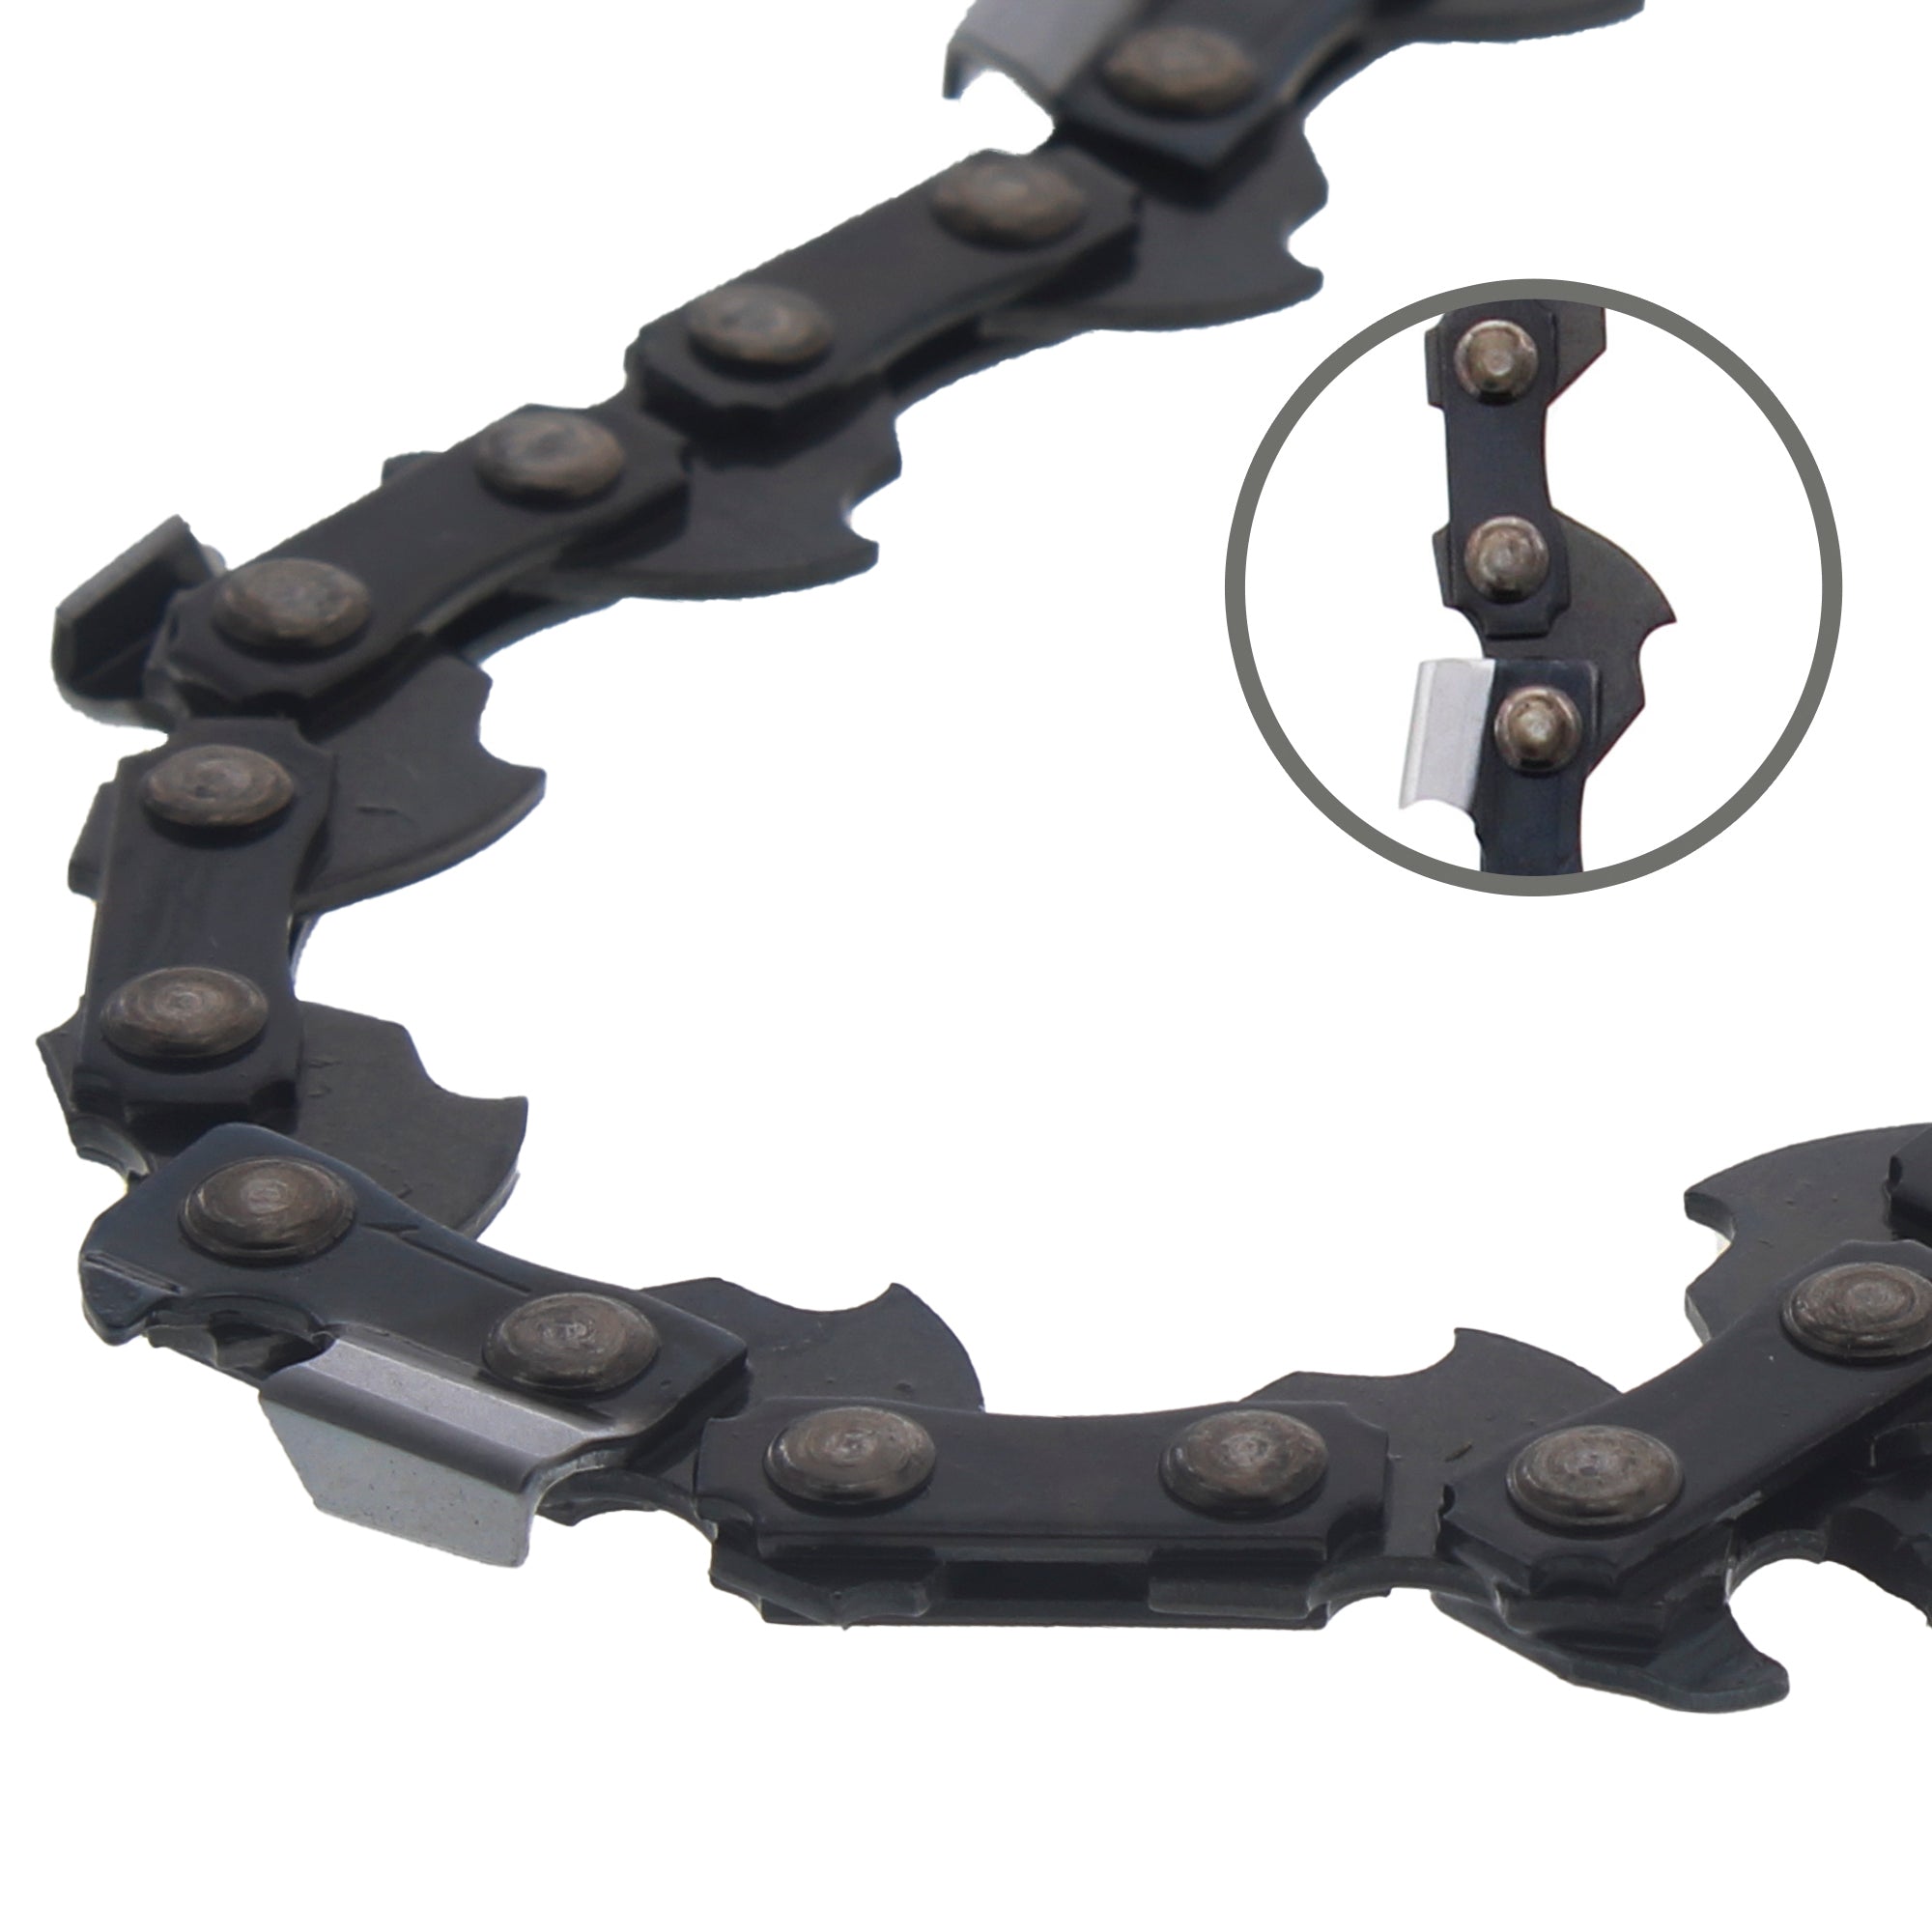 8TEN Chain 10-Pack 72EXJ091G 72EXL091G 33RS91E H4791